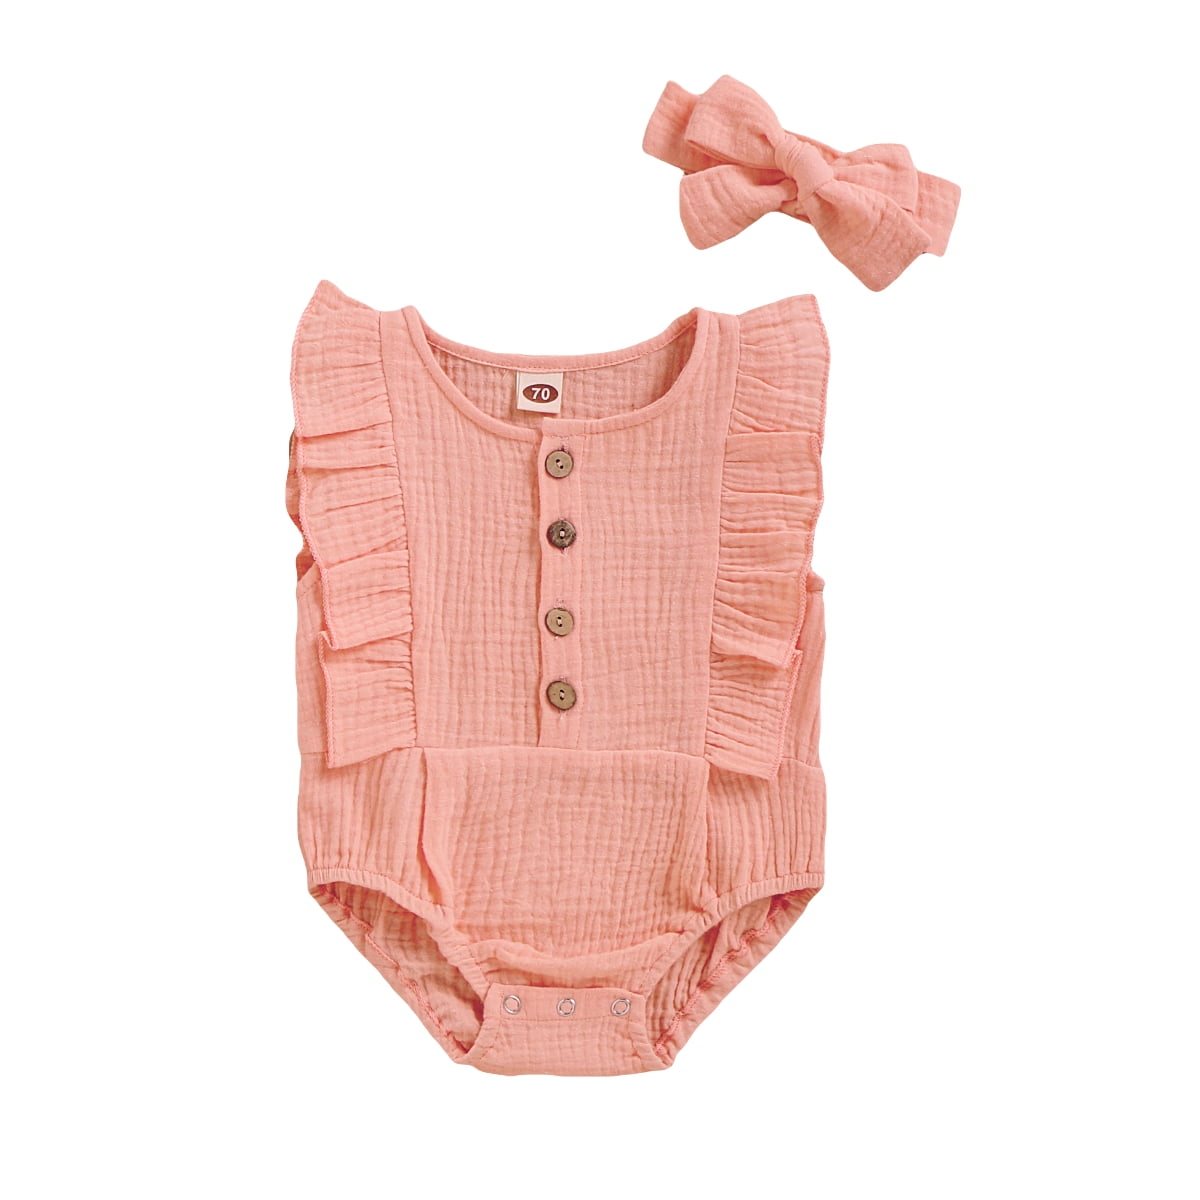 Newborn Rompers Infant Baby Girl Jumpsuit Outfit Kid Sleeveless Ruffled Bodysuit